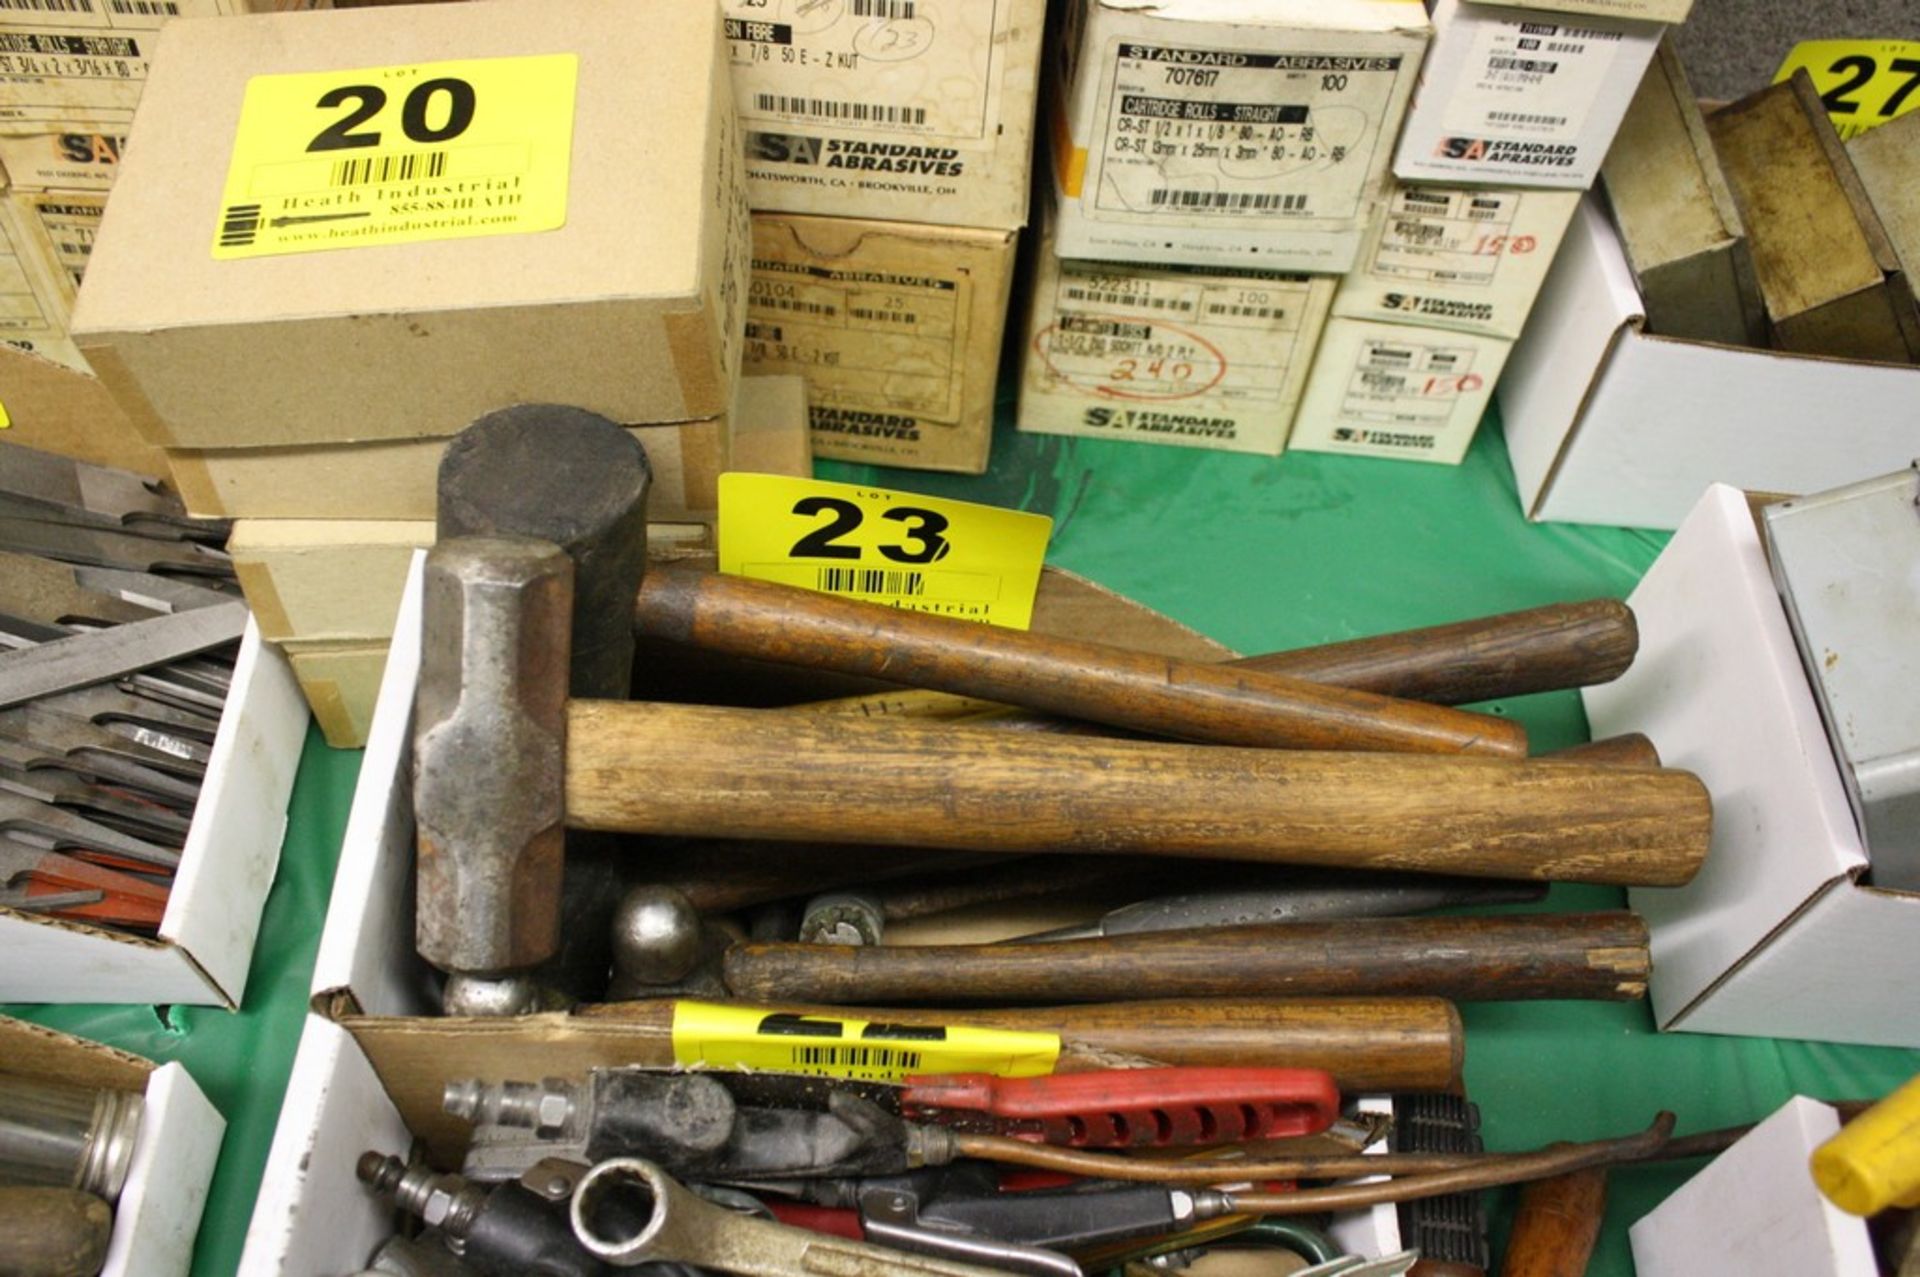 LOT: HAMMERS IN BOX